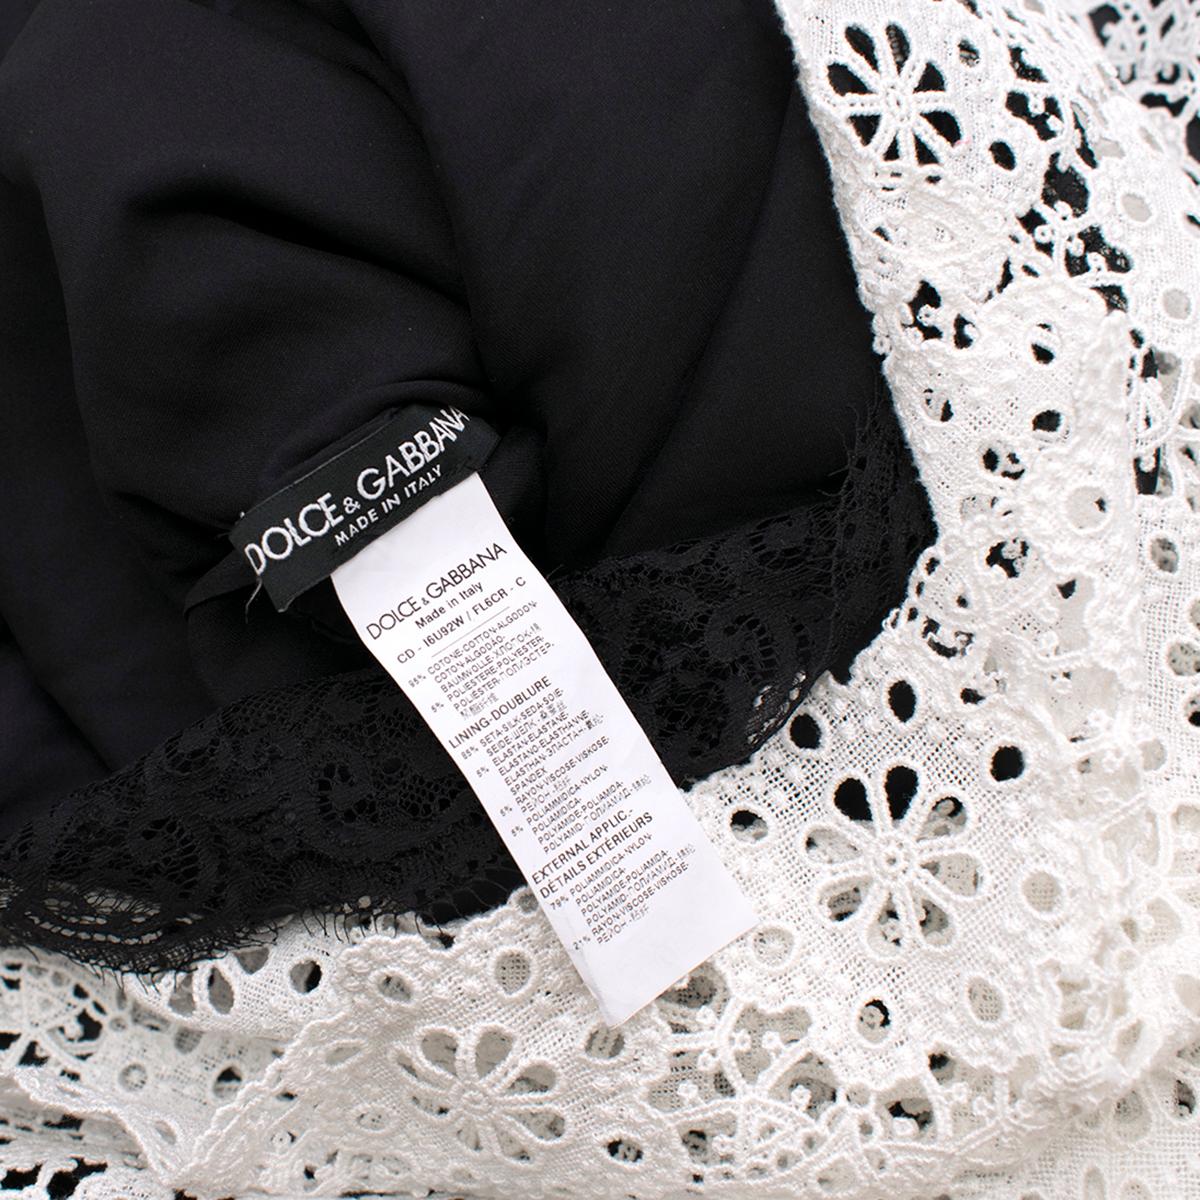 Dolce & Gabbana Black & White Lace Overlay Dress - Size Small For Sale 2